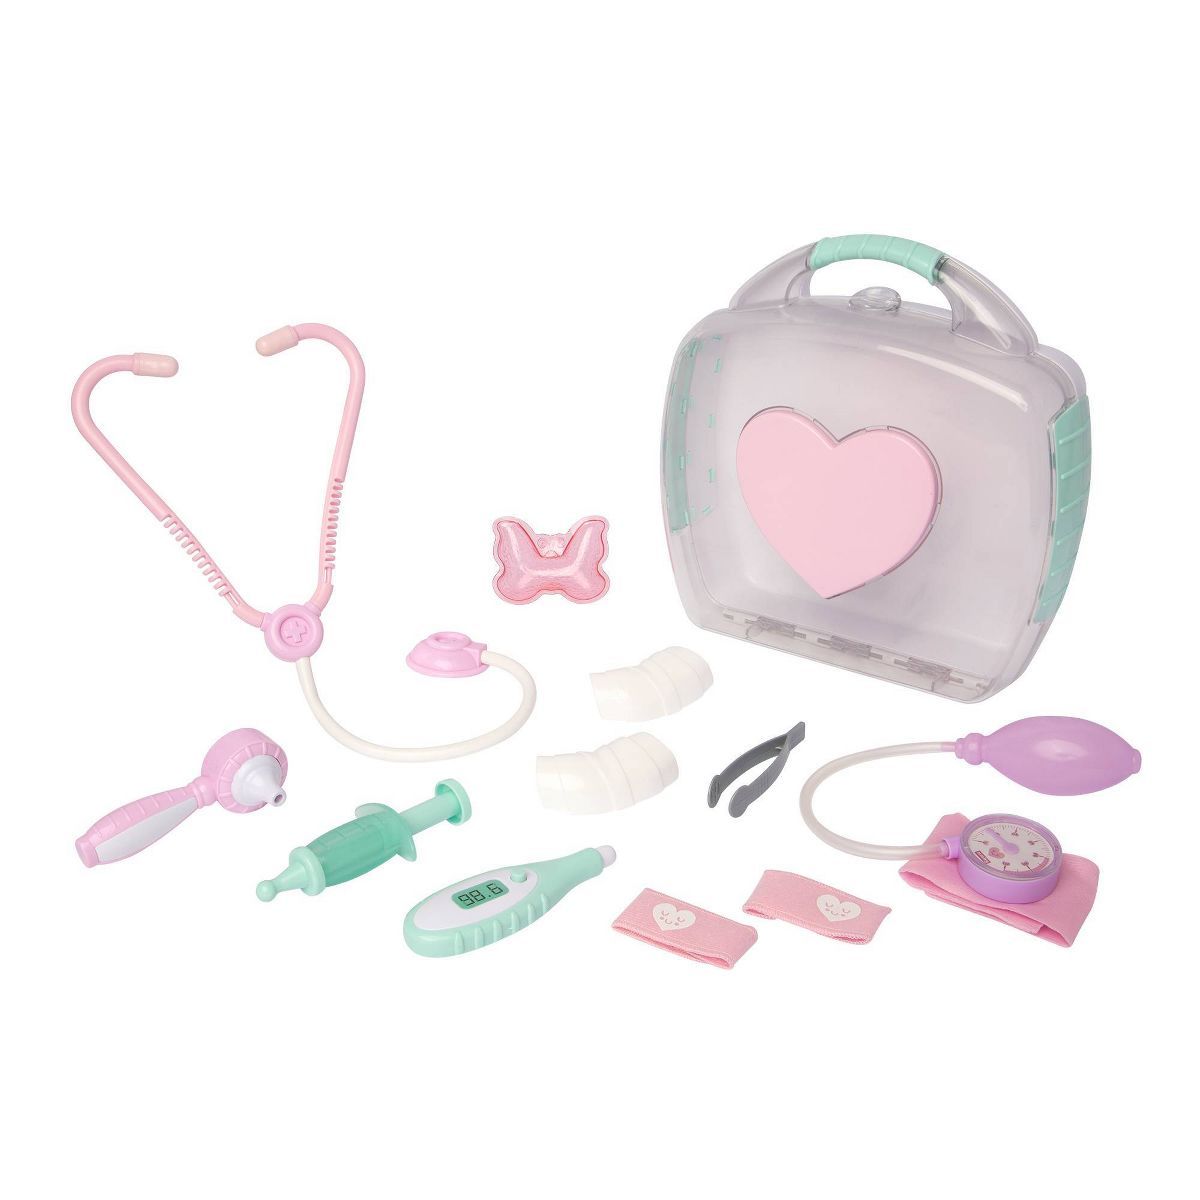 Perfectly Cute Doctor Kit | Target